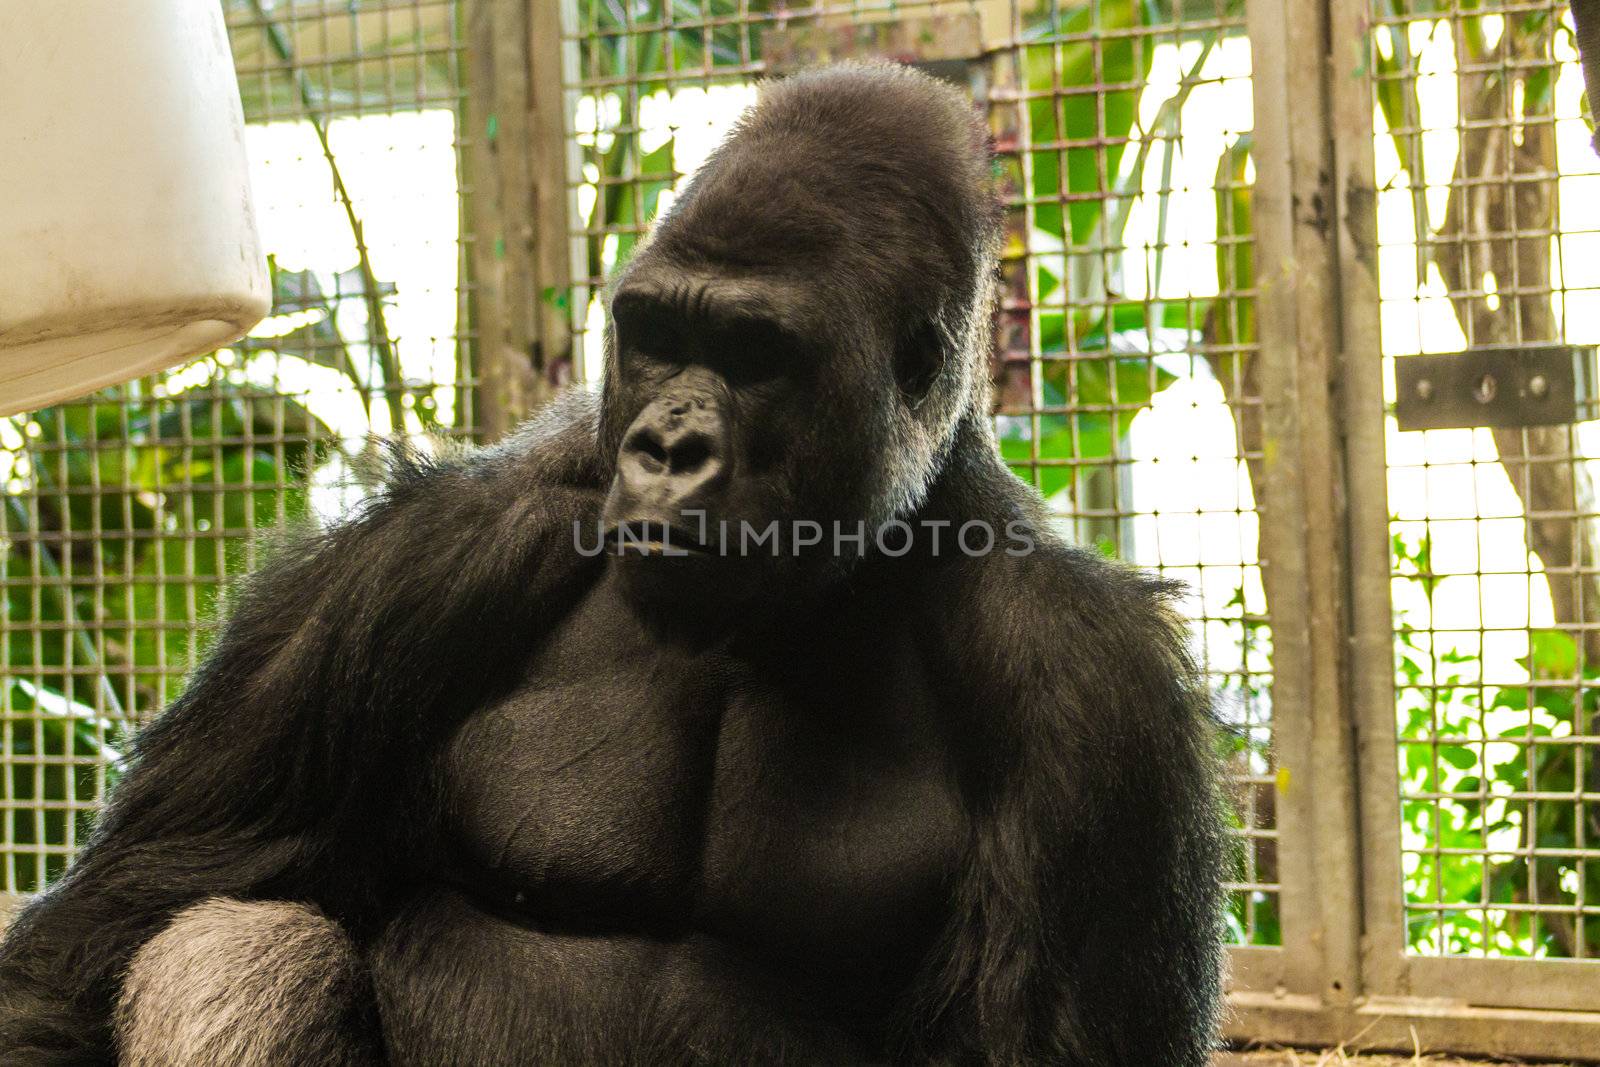 A Western Lowland Gorilla awaits feeding time.

The western lowland gorilla lives in forests and lowland swamps in central Africa in Angola, Cameroon, Central African Republic, Congo, Democratic Republic of the Congo, Equatorial Guinea and Gabon.